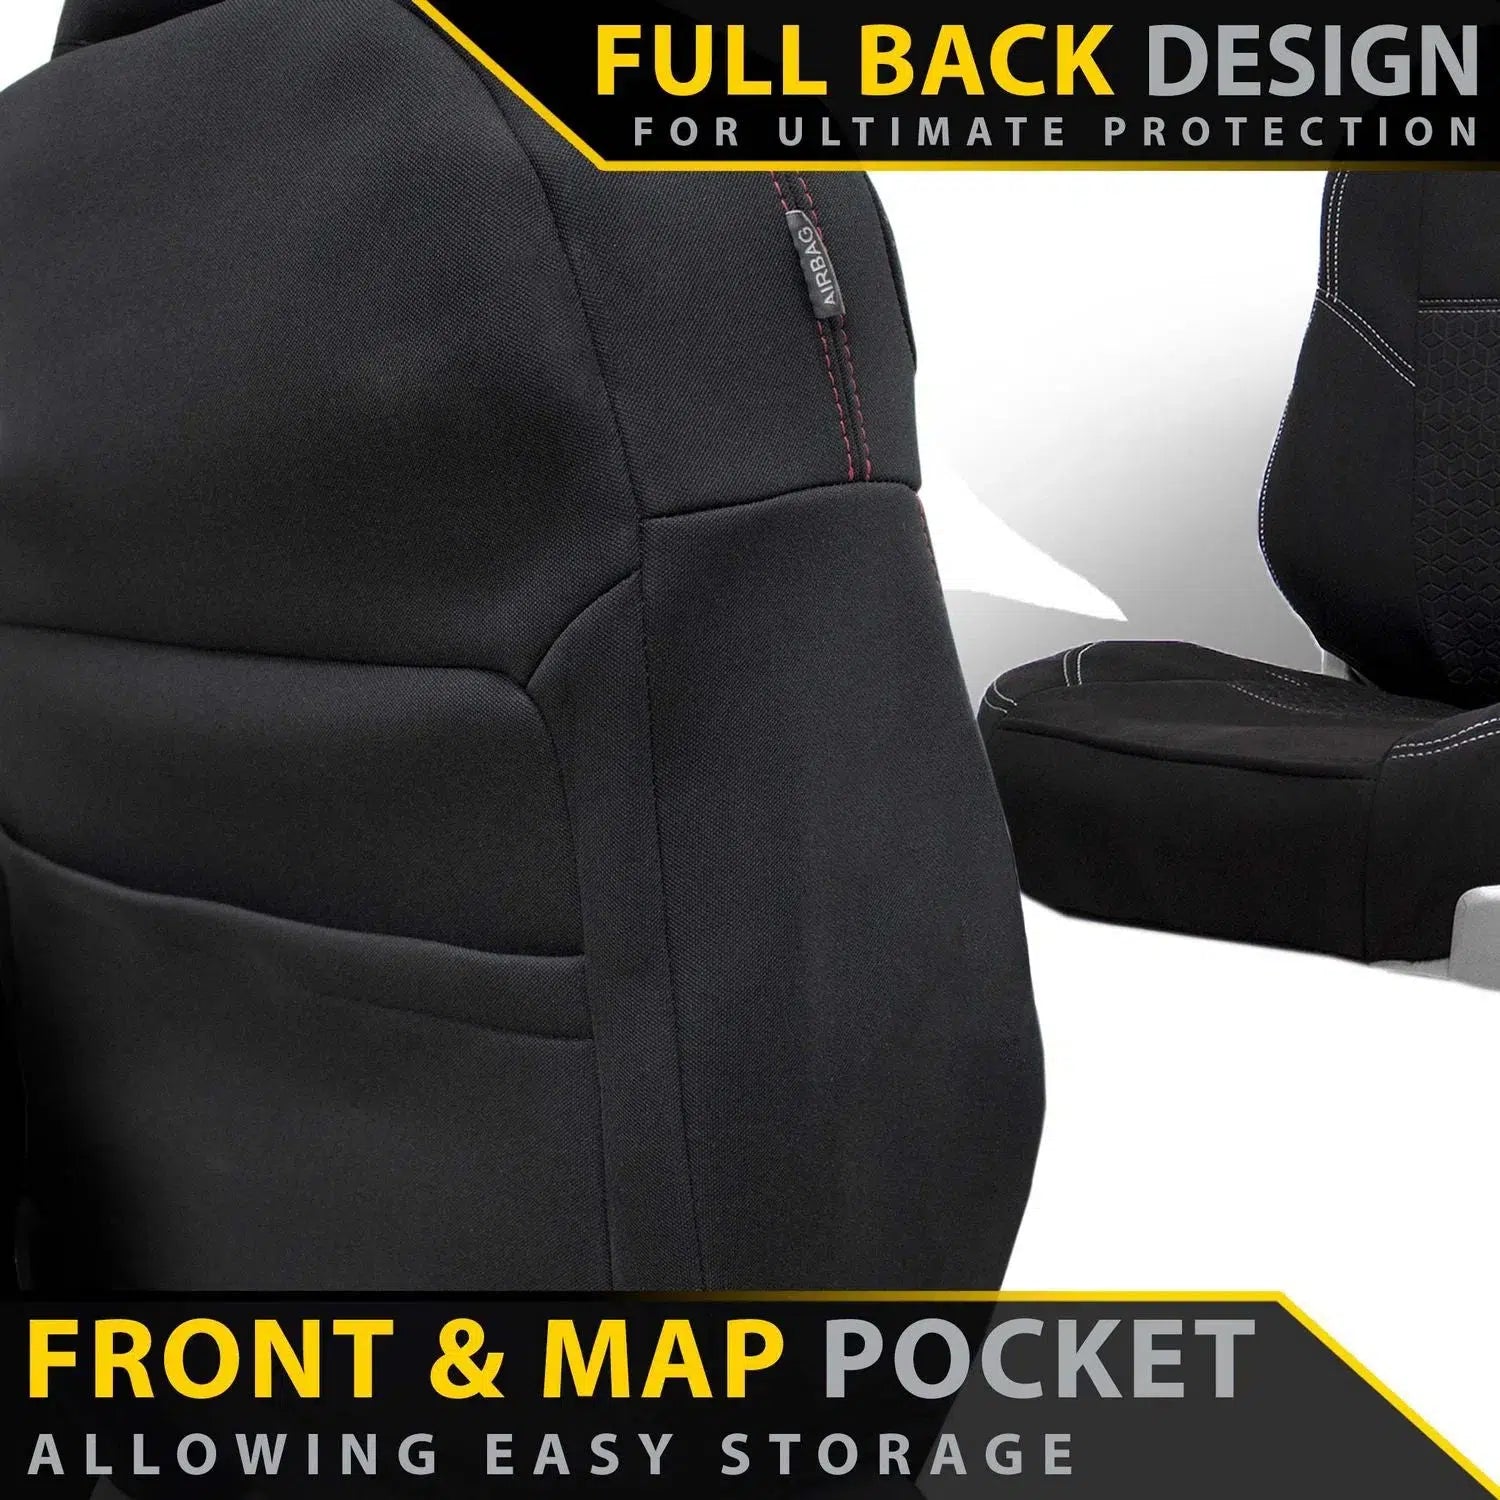 Toyota HiLux 7th Gen (STD SEAT) Premium Neoprene 2x Front Seat Covers (Made to Order)